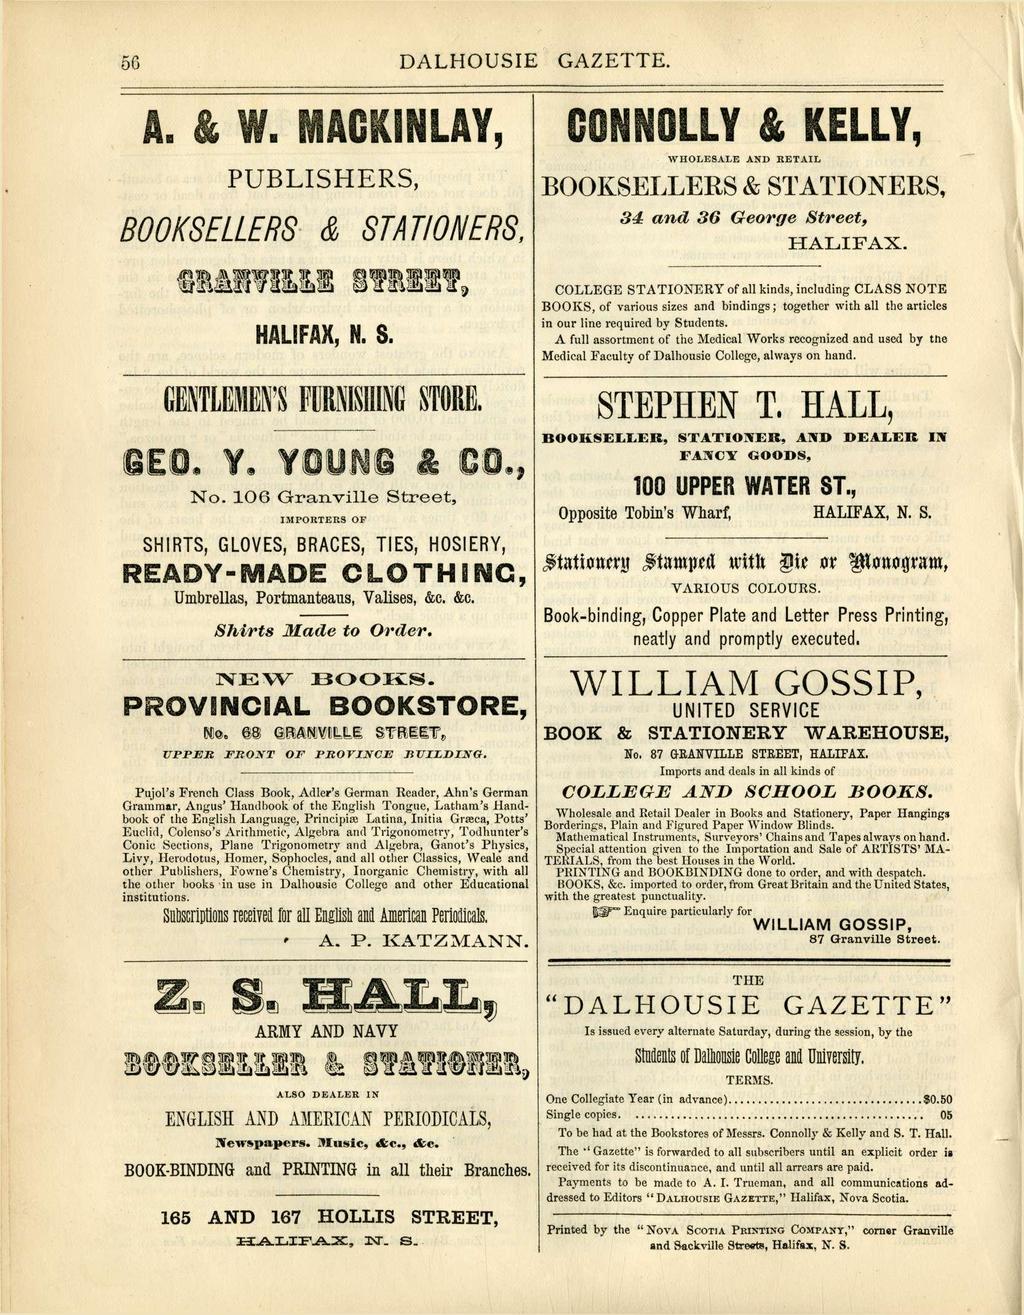 56 DALHOUSIE GAZETTE. '. 1IC UN LAY, CONNOLLY & KELLY, PUBLISHERS, BOOKSELLERS & STATIONERS, WHOLESALE AND RETAIL BOOKSELLERS & STATIONERS, 34 and 36 Geoge Steet, HALIFAX. HALIFAX, N. S. GiTLlMl'SFURNISHINGSTORE.